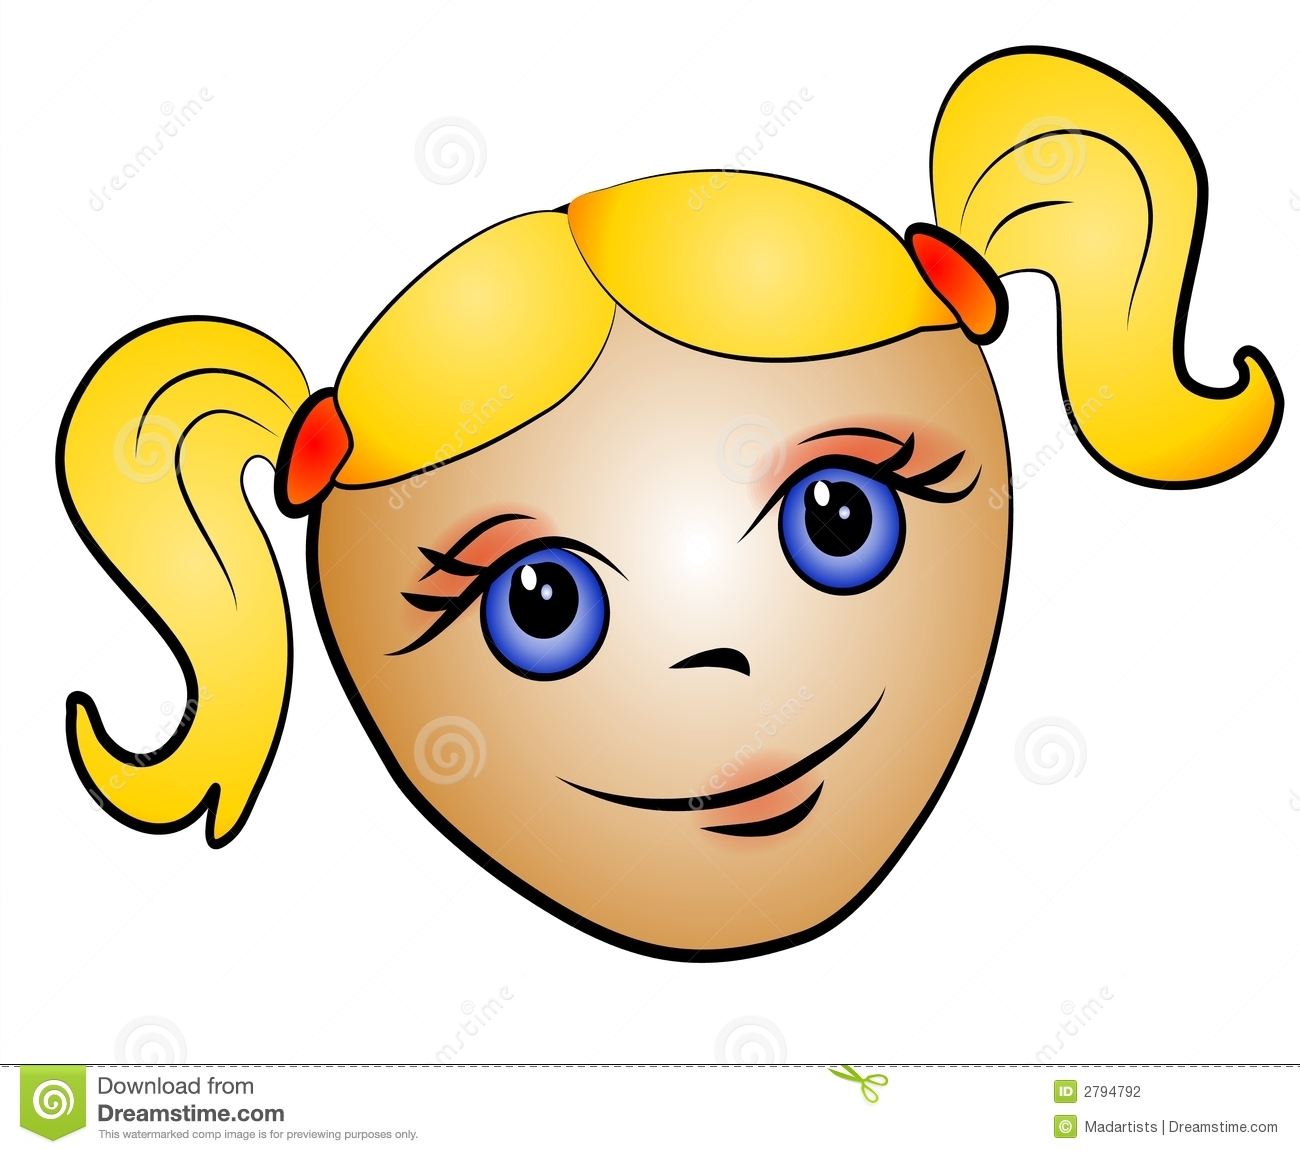 Cartoon Caricature Illustration Of A Little Girl S Head   A Toddler